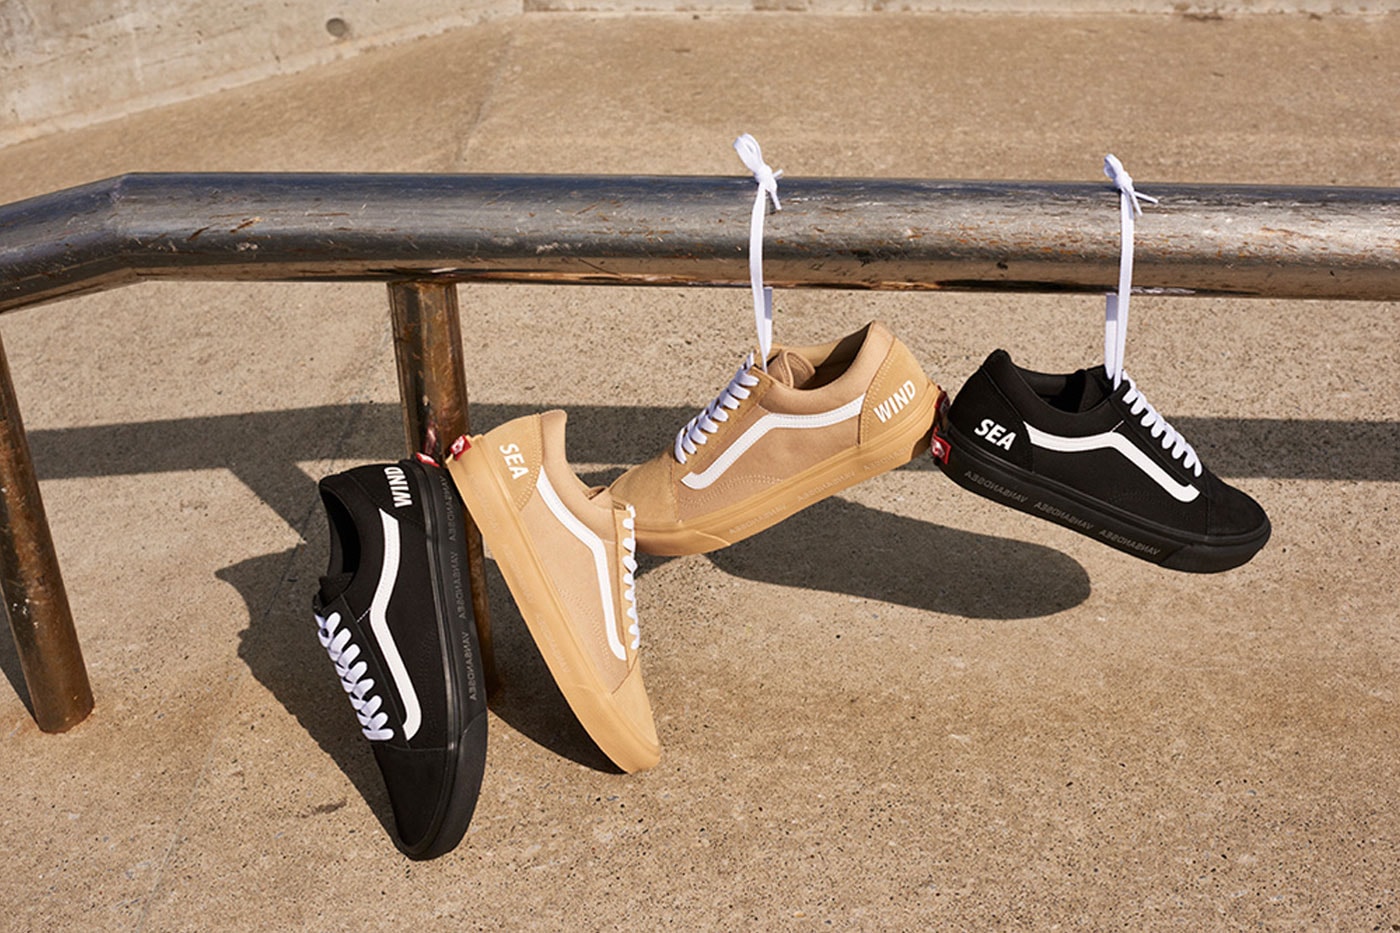 WIND AND SEA Vans Japan Capsule Collection Release Info date store list buying guide photos price